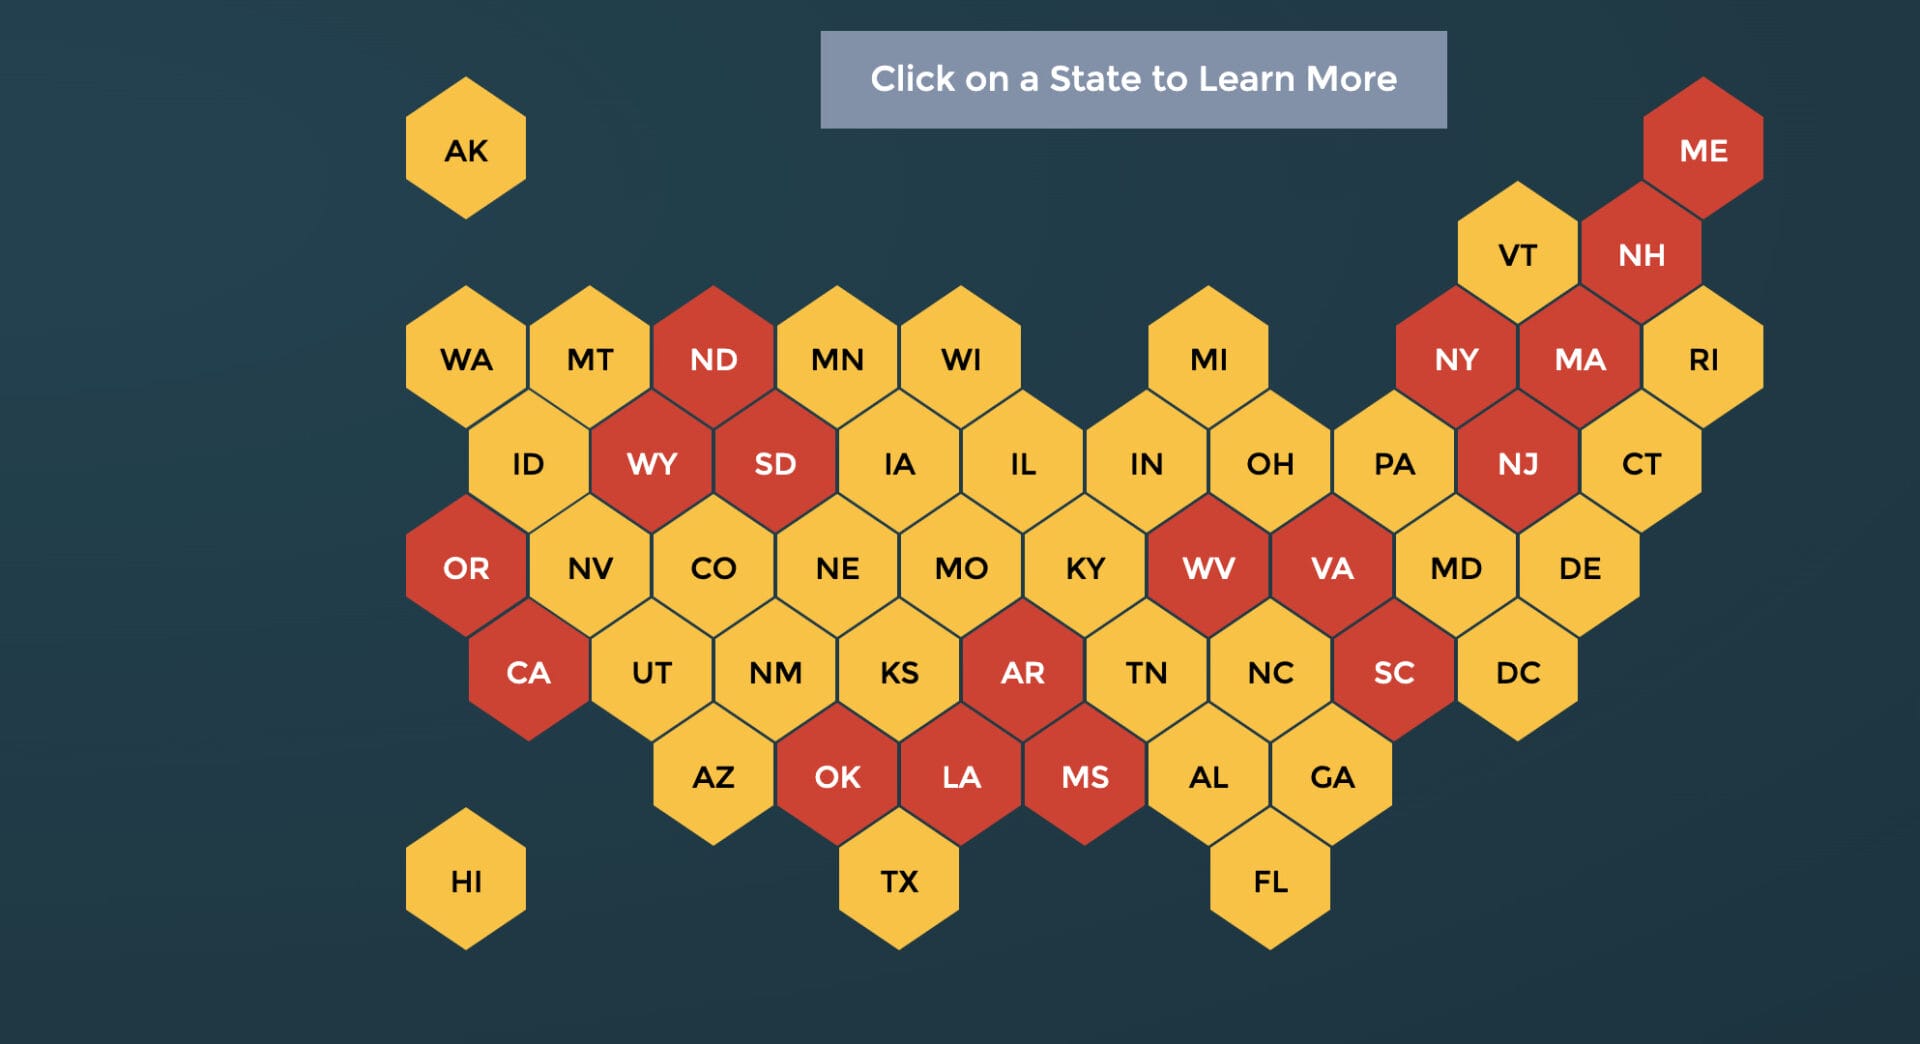 Honeycomb map of the United States of America with some states being colored yellow and other states being colored red